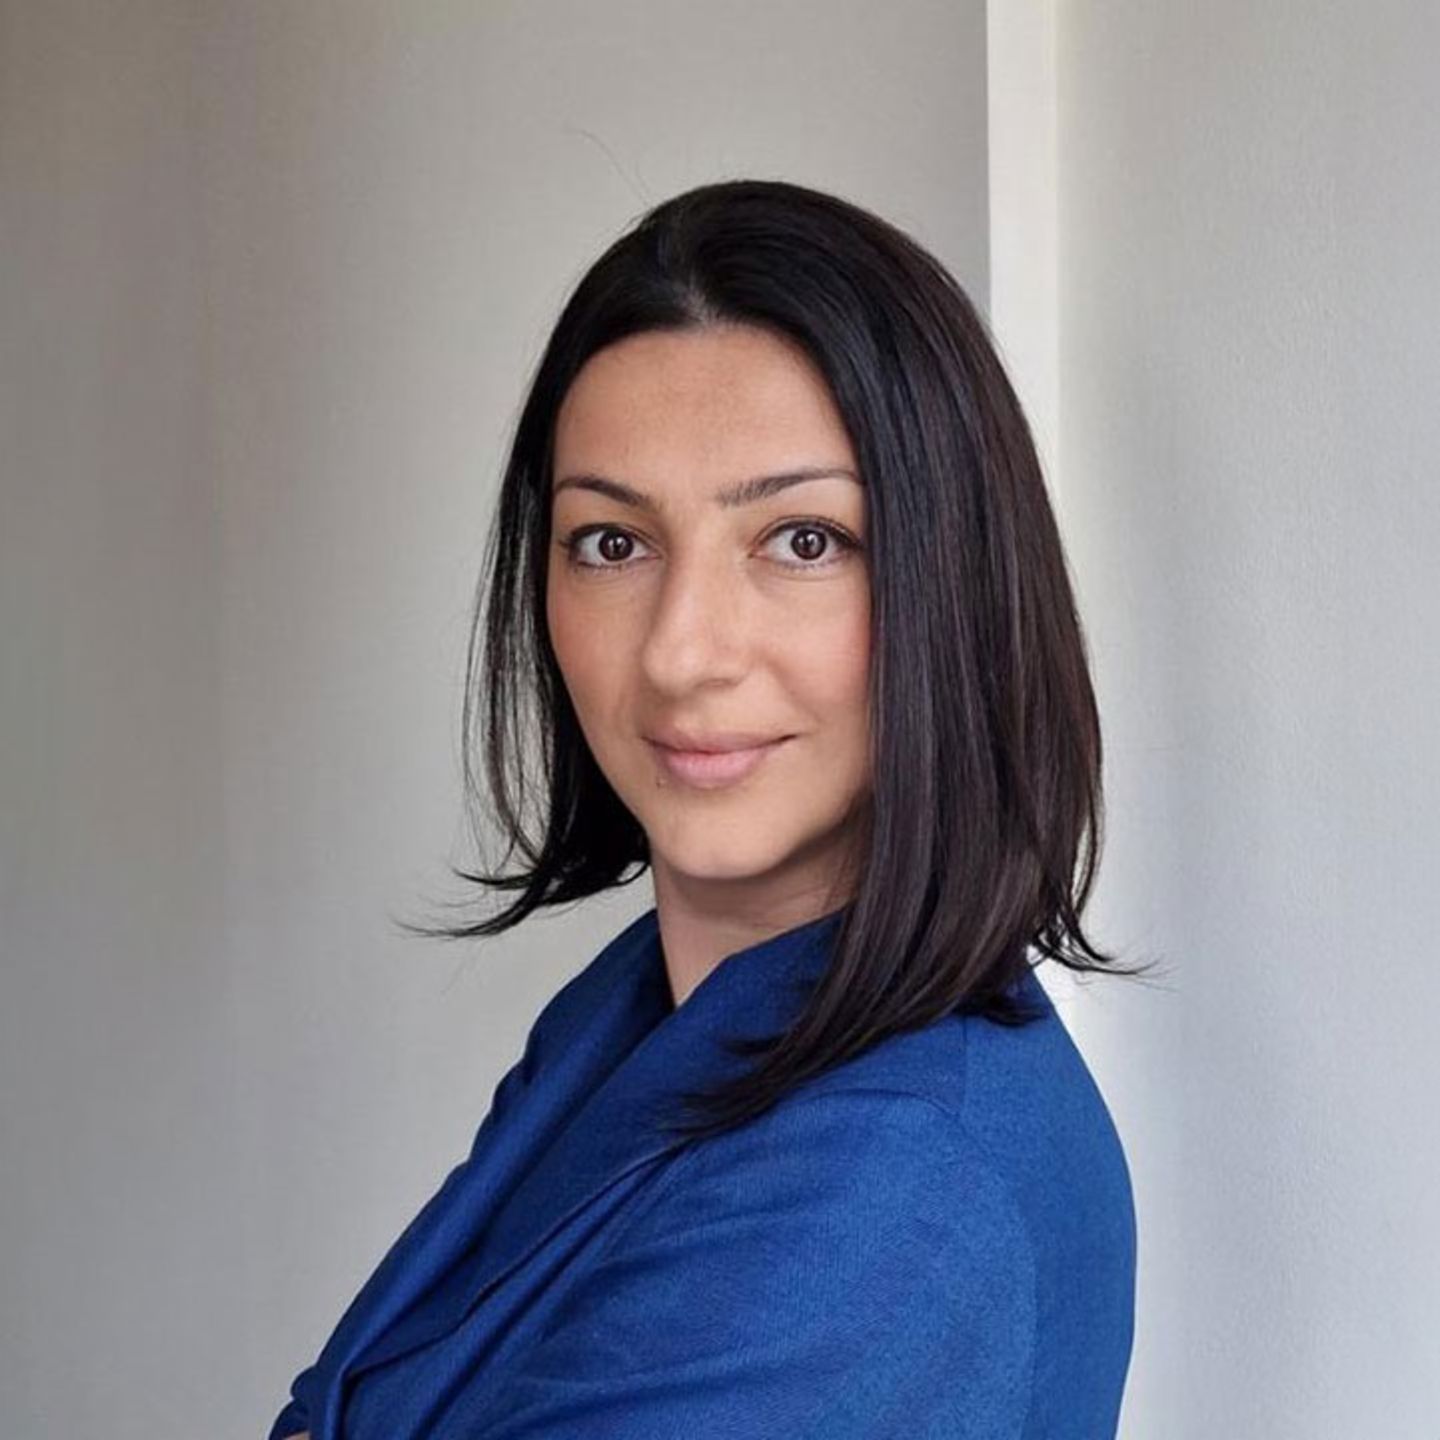 A photo shows Mirjana Ćevriz, Business analyst at EOS Serbia and member of the K+ Experts team.